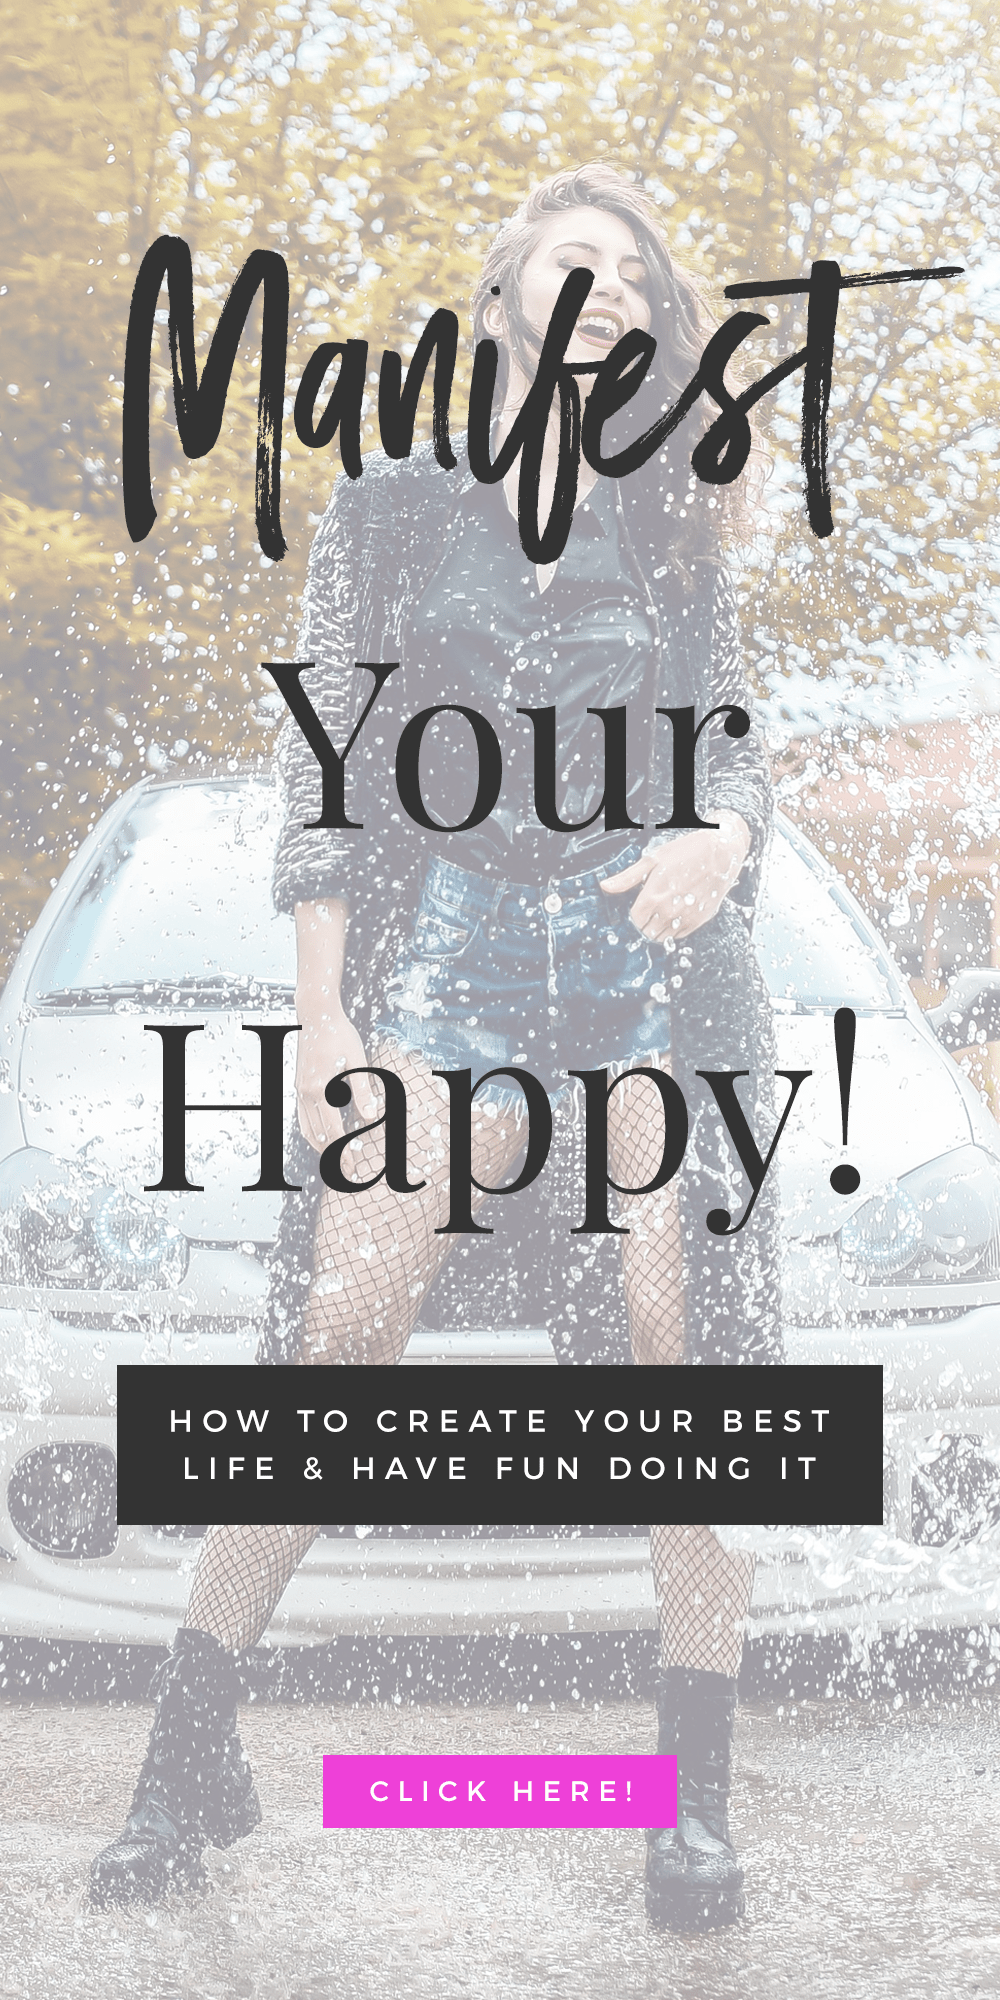 Manifest Your Happy! How To Create Your Best Life & Have Fun Doing It